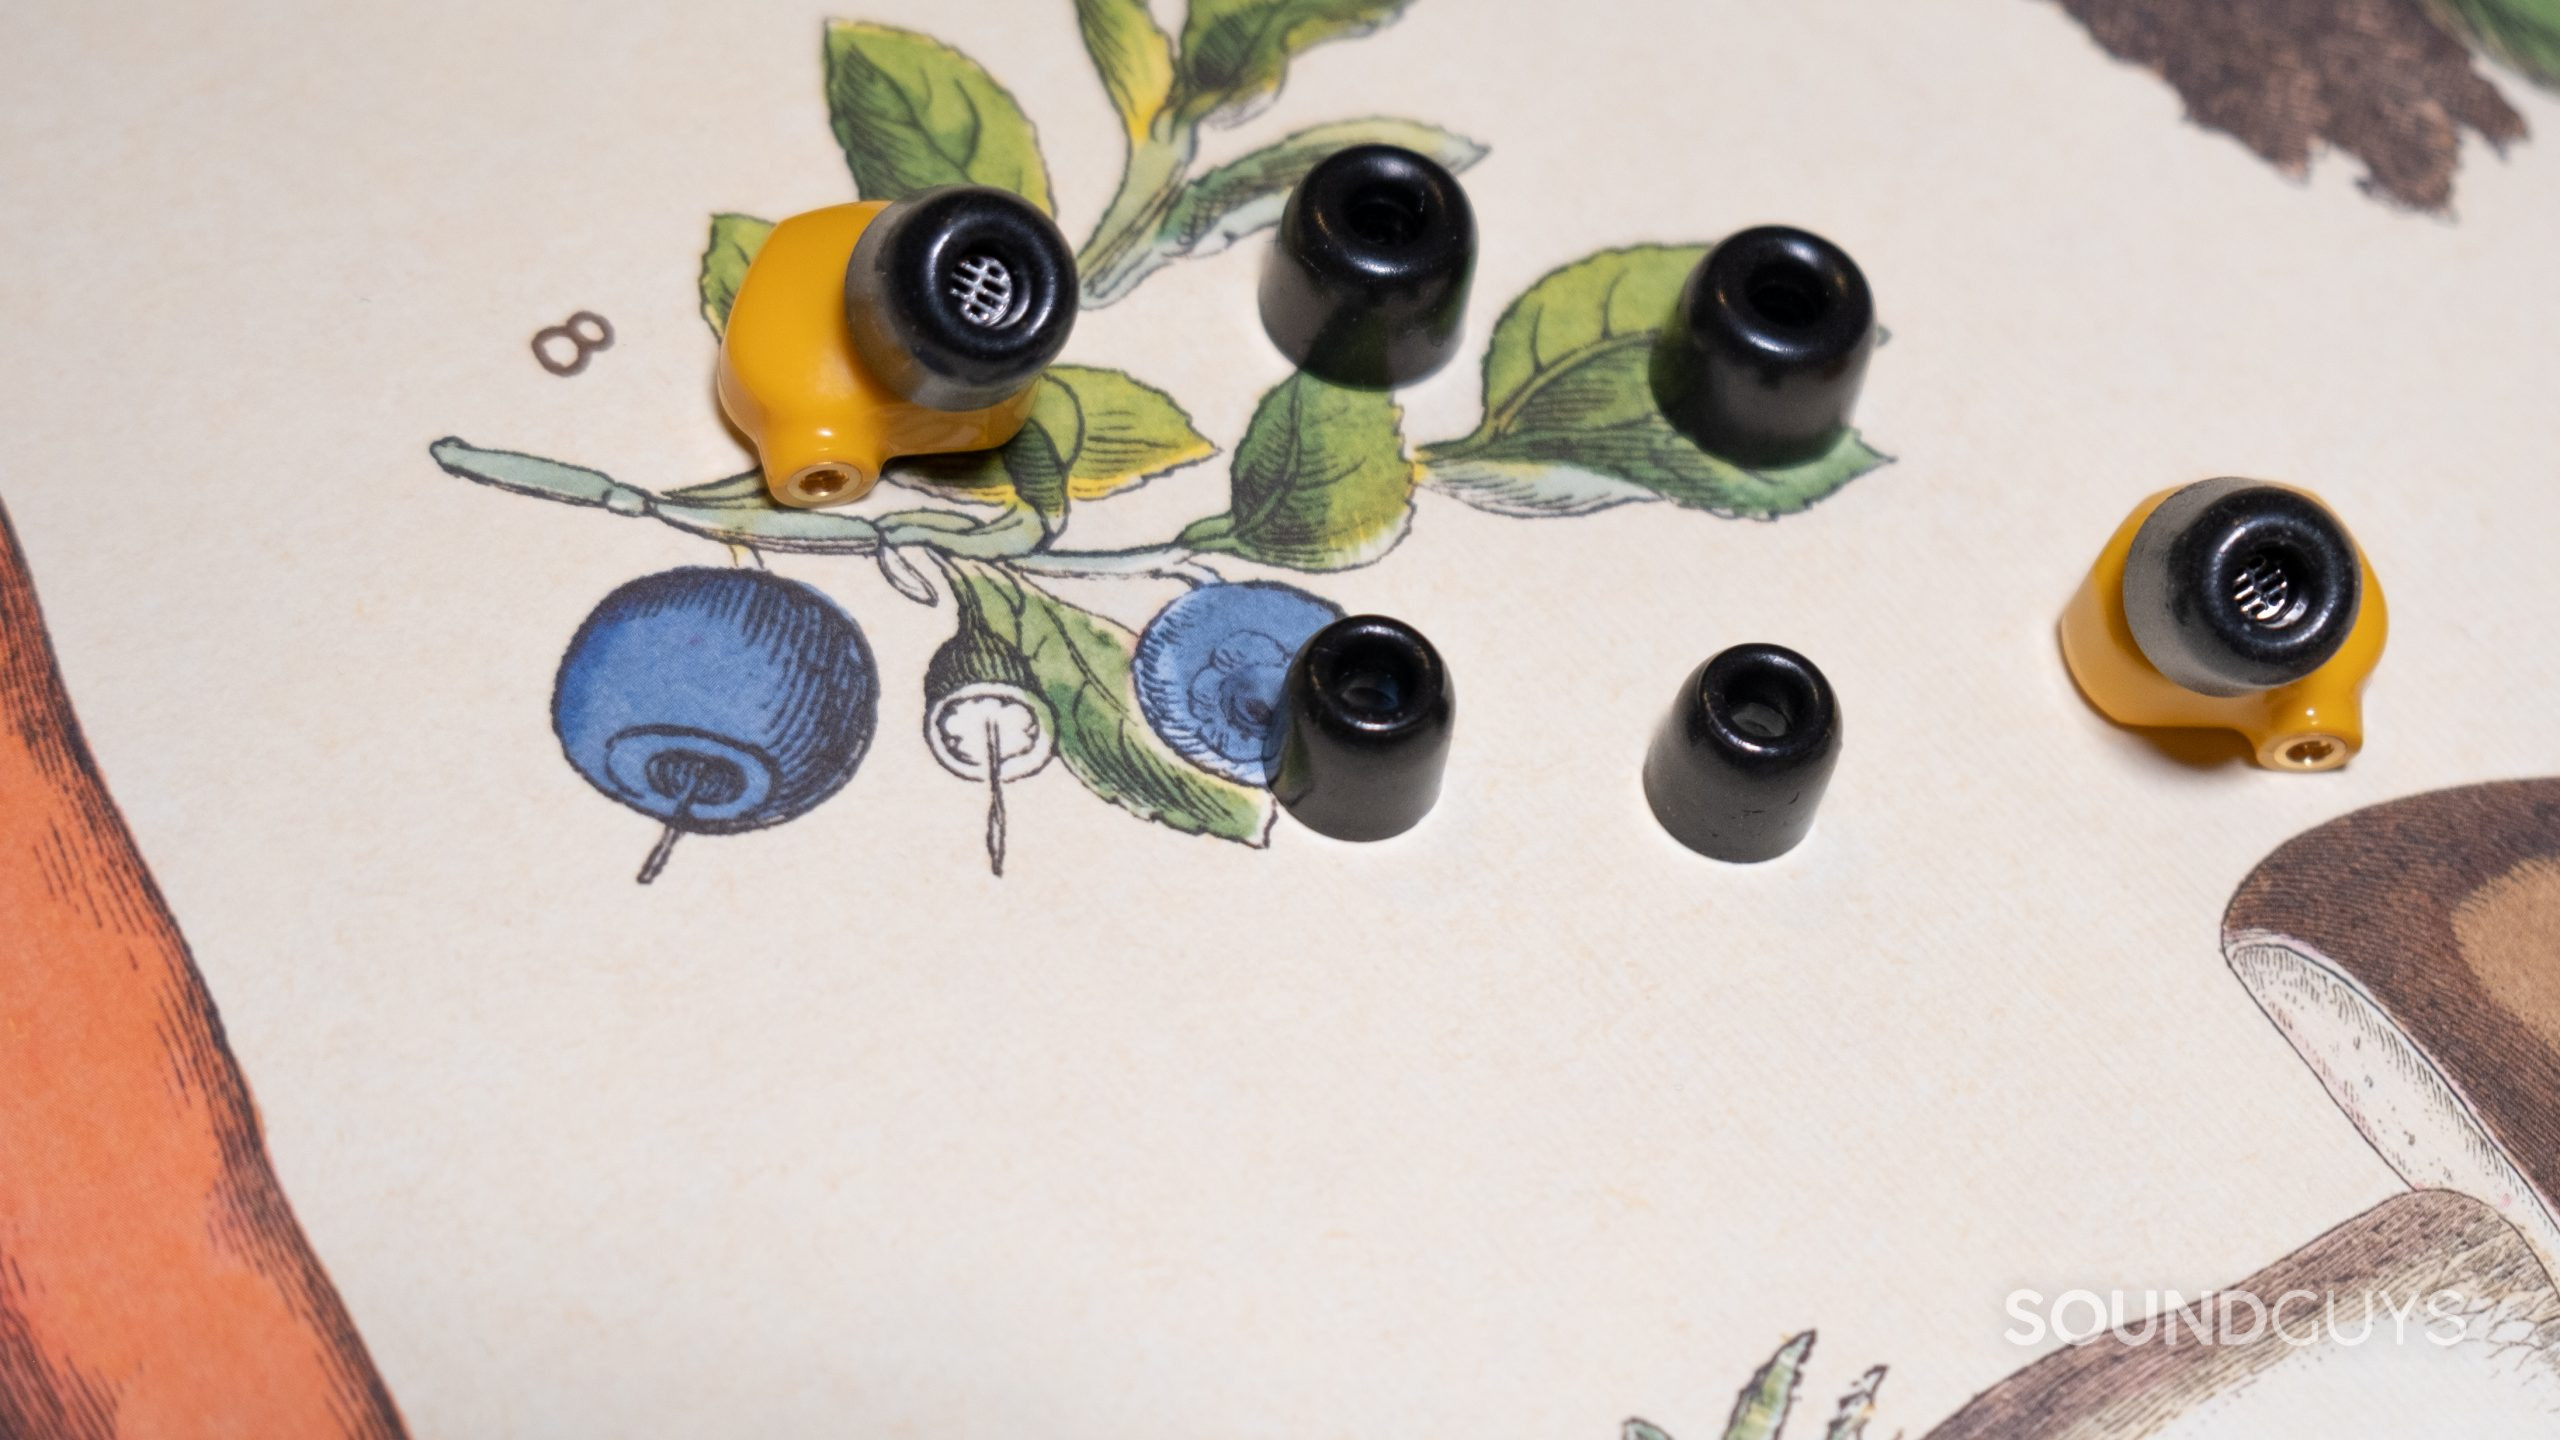 The foam ear tips in sizes small through large shown with the Campfire Audio Honeydew.